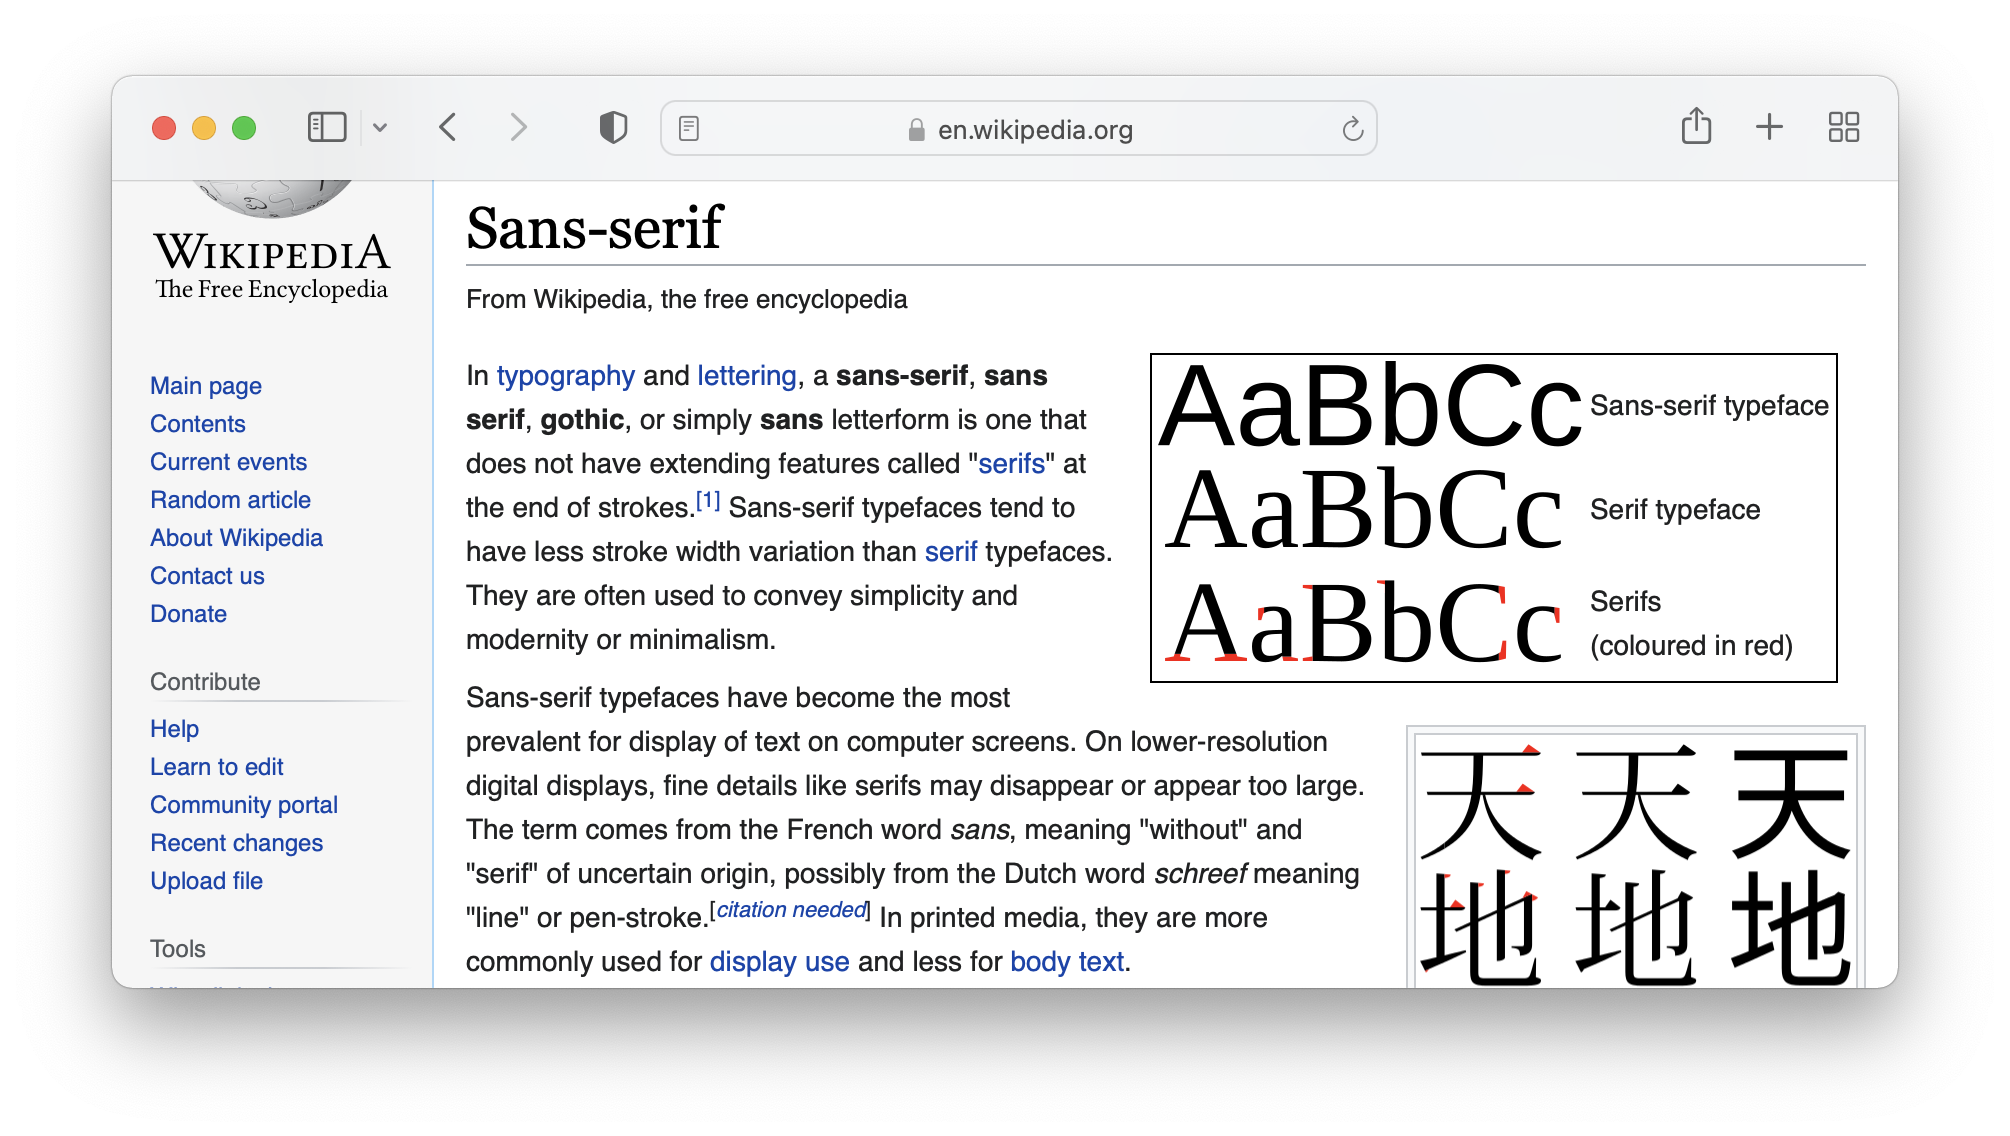 A browser window of the Wikipedia page about sans-serif fonts. It uses a serif font